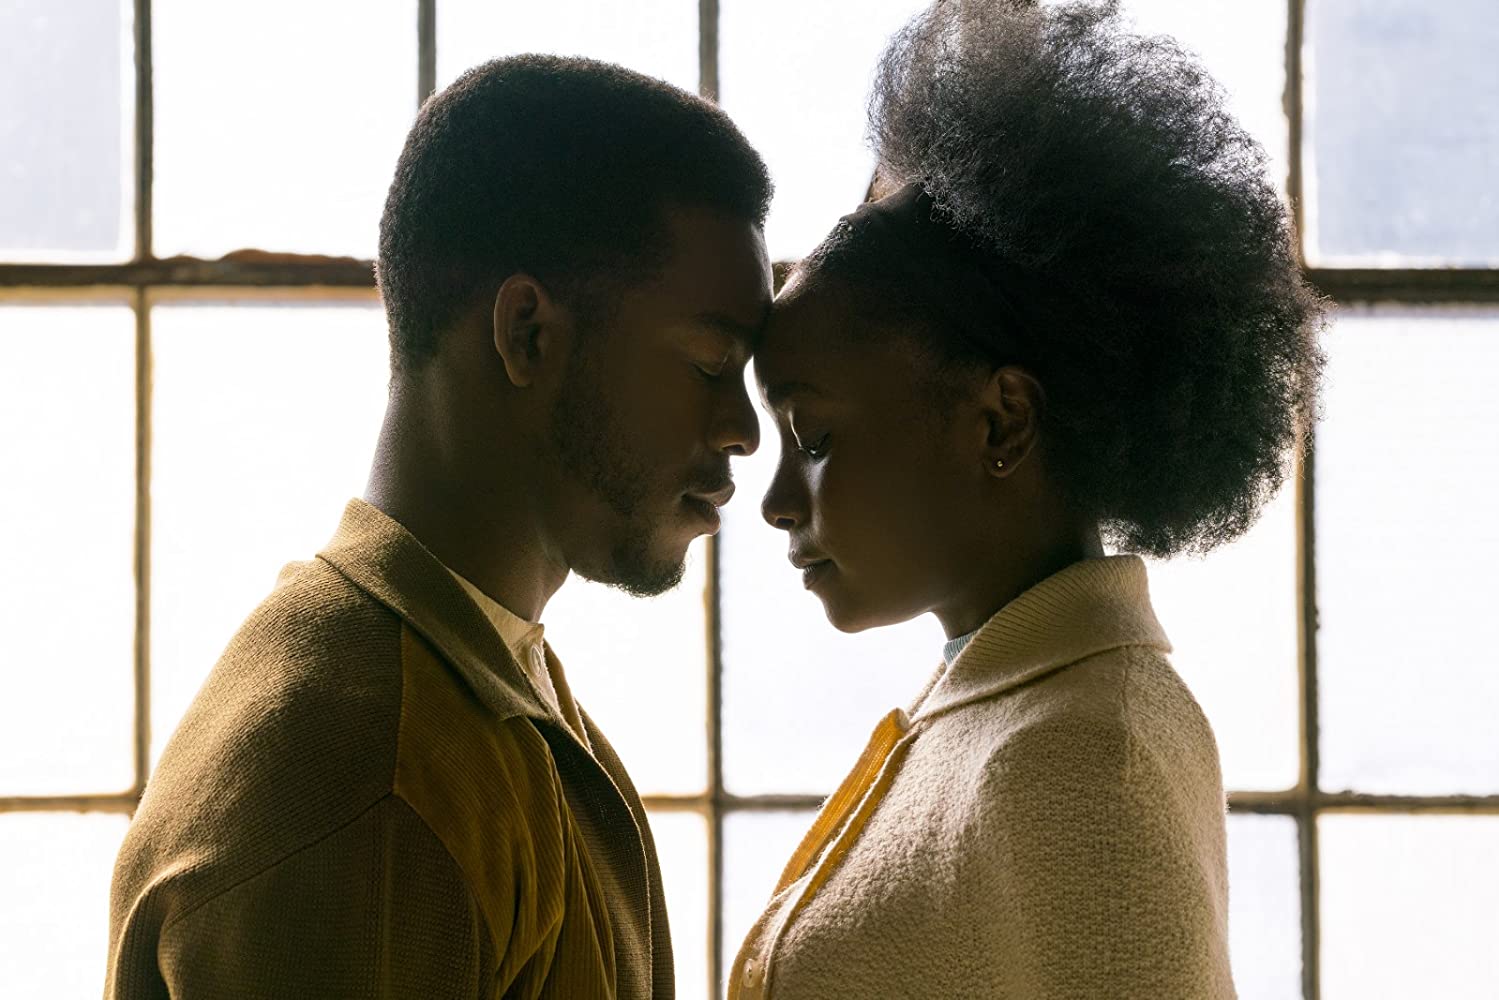 Stephan James and KiKi Layne in If Beale Street Could Talk. Photo credit: Annapurna Releasing. This is one of the 30 films Redbox recommends to learn about systemic racism.